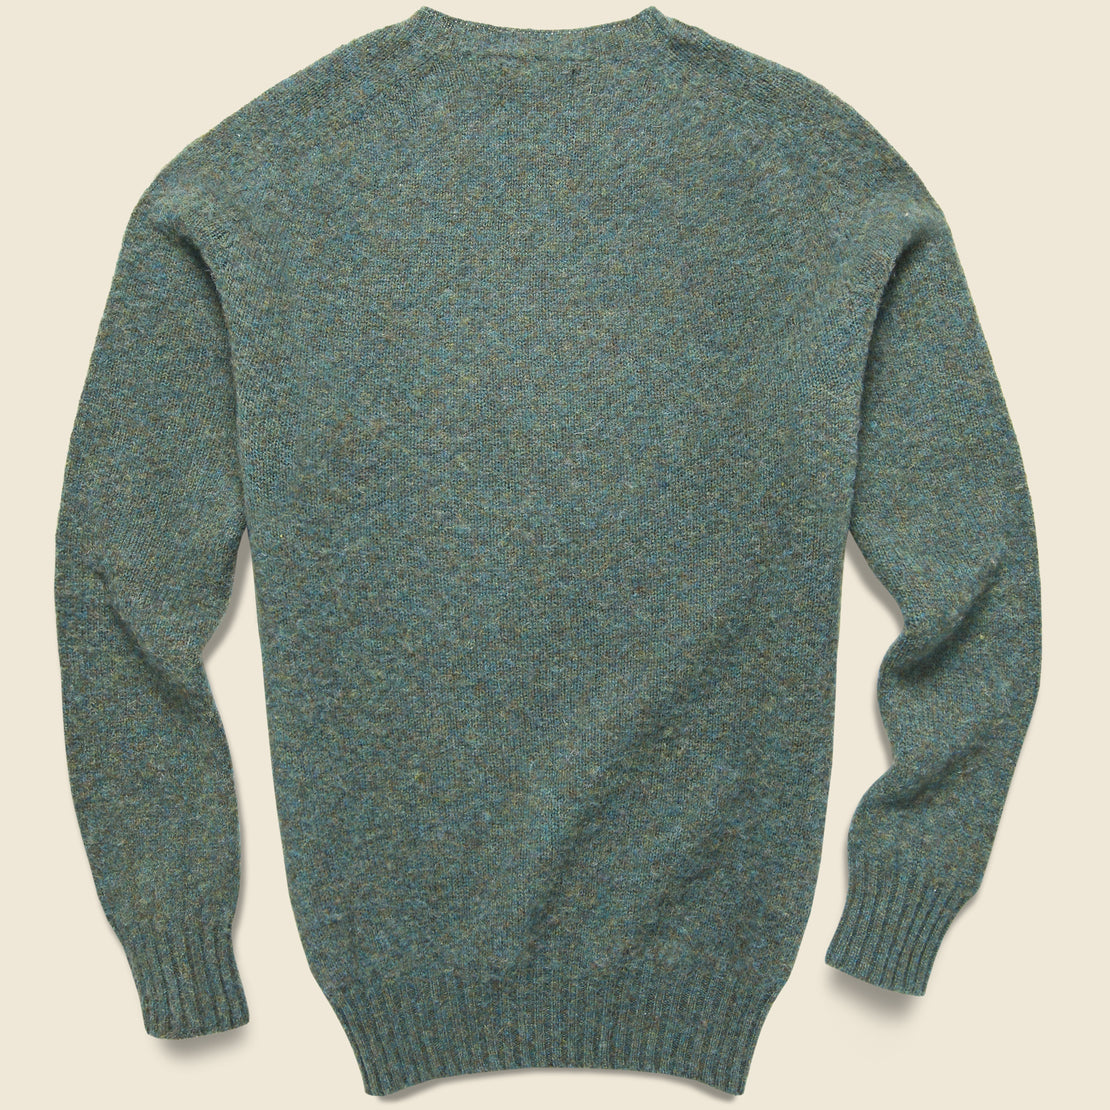 Birth Of The Cool Solid Crew Sweater - Exotique (Teal) - Howlin - STAG Provisions - Tops - Sweater